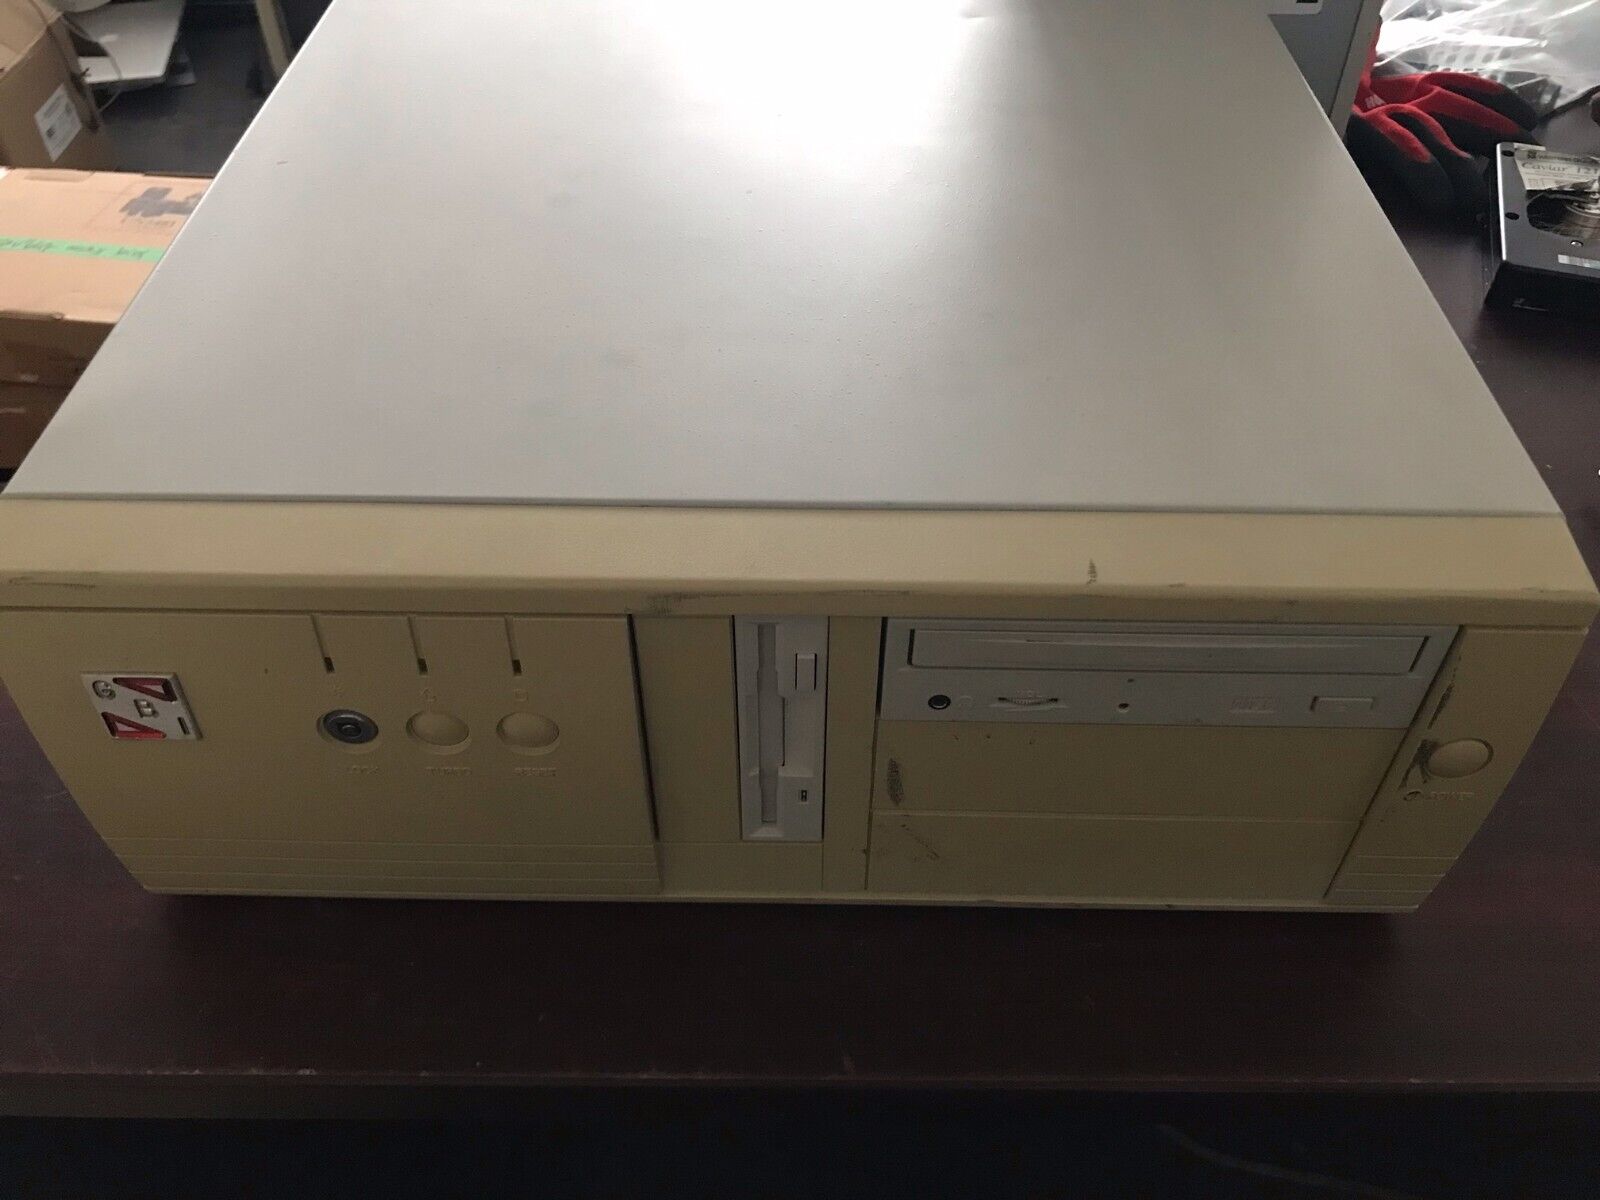 VERY RARE VINTAGE GBI COMPUTER MMX 200MHZ , 32MB RAM W/ HDD 